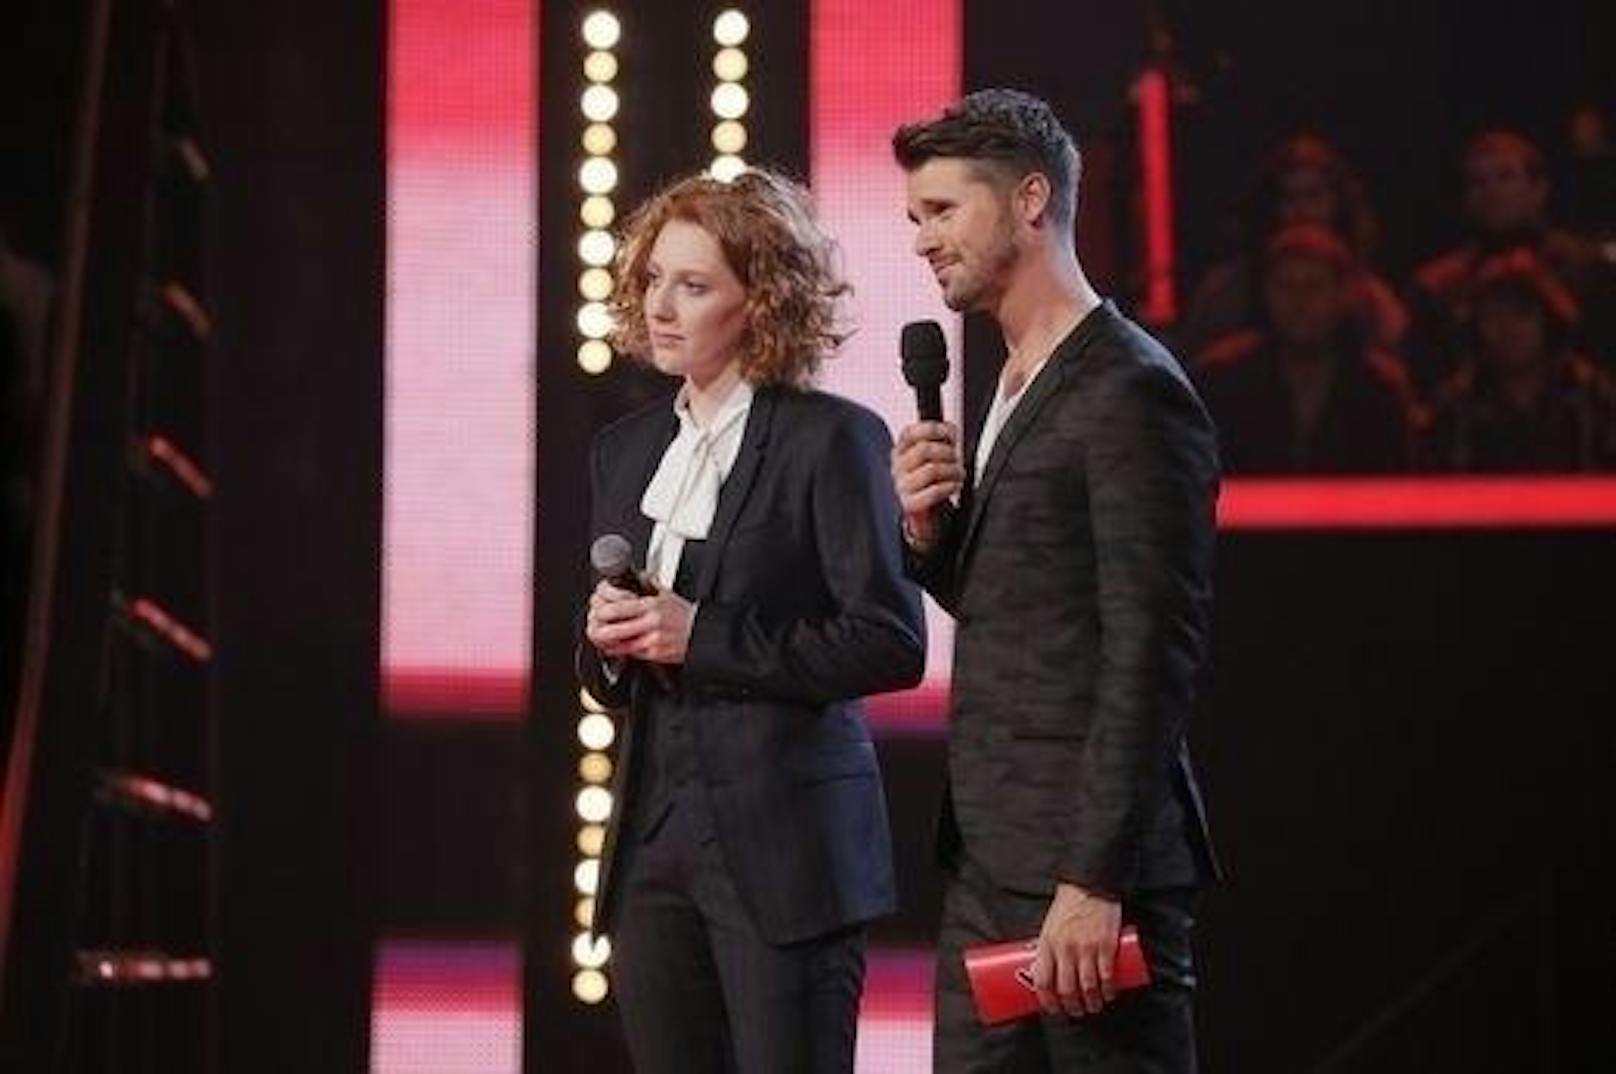 Anna Heimrath in "The Voice of Germany"